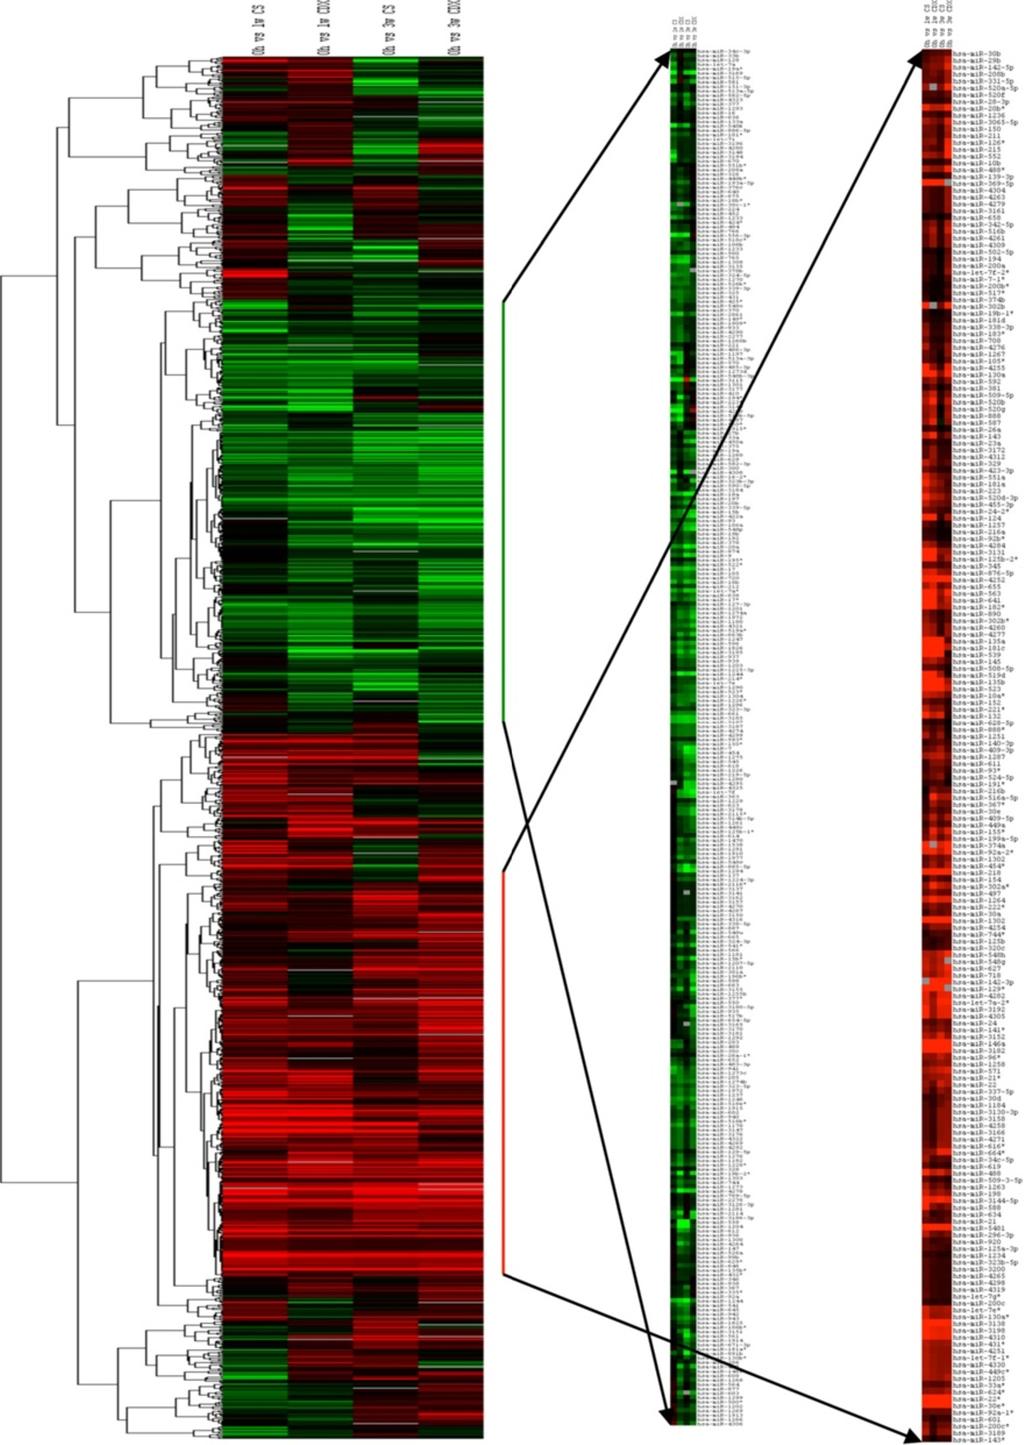 Ottman et al. Molecular Cancer 2014, 13:1 Page 4 of 21 Figure 2 Cluster analysis of fold change in expression of mirnas in different treatment conditions.